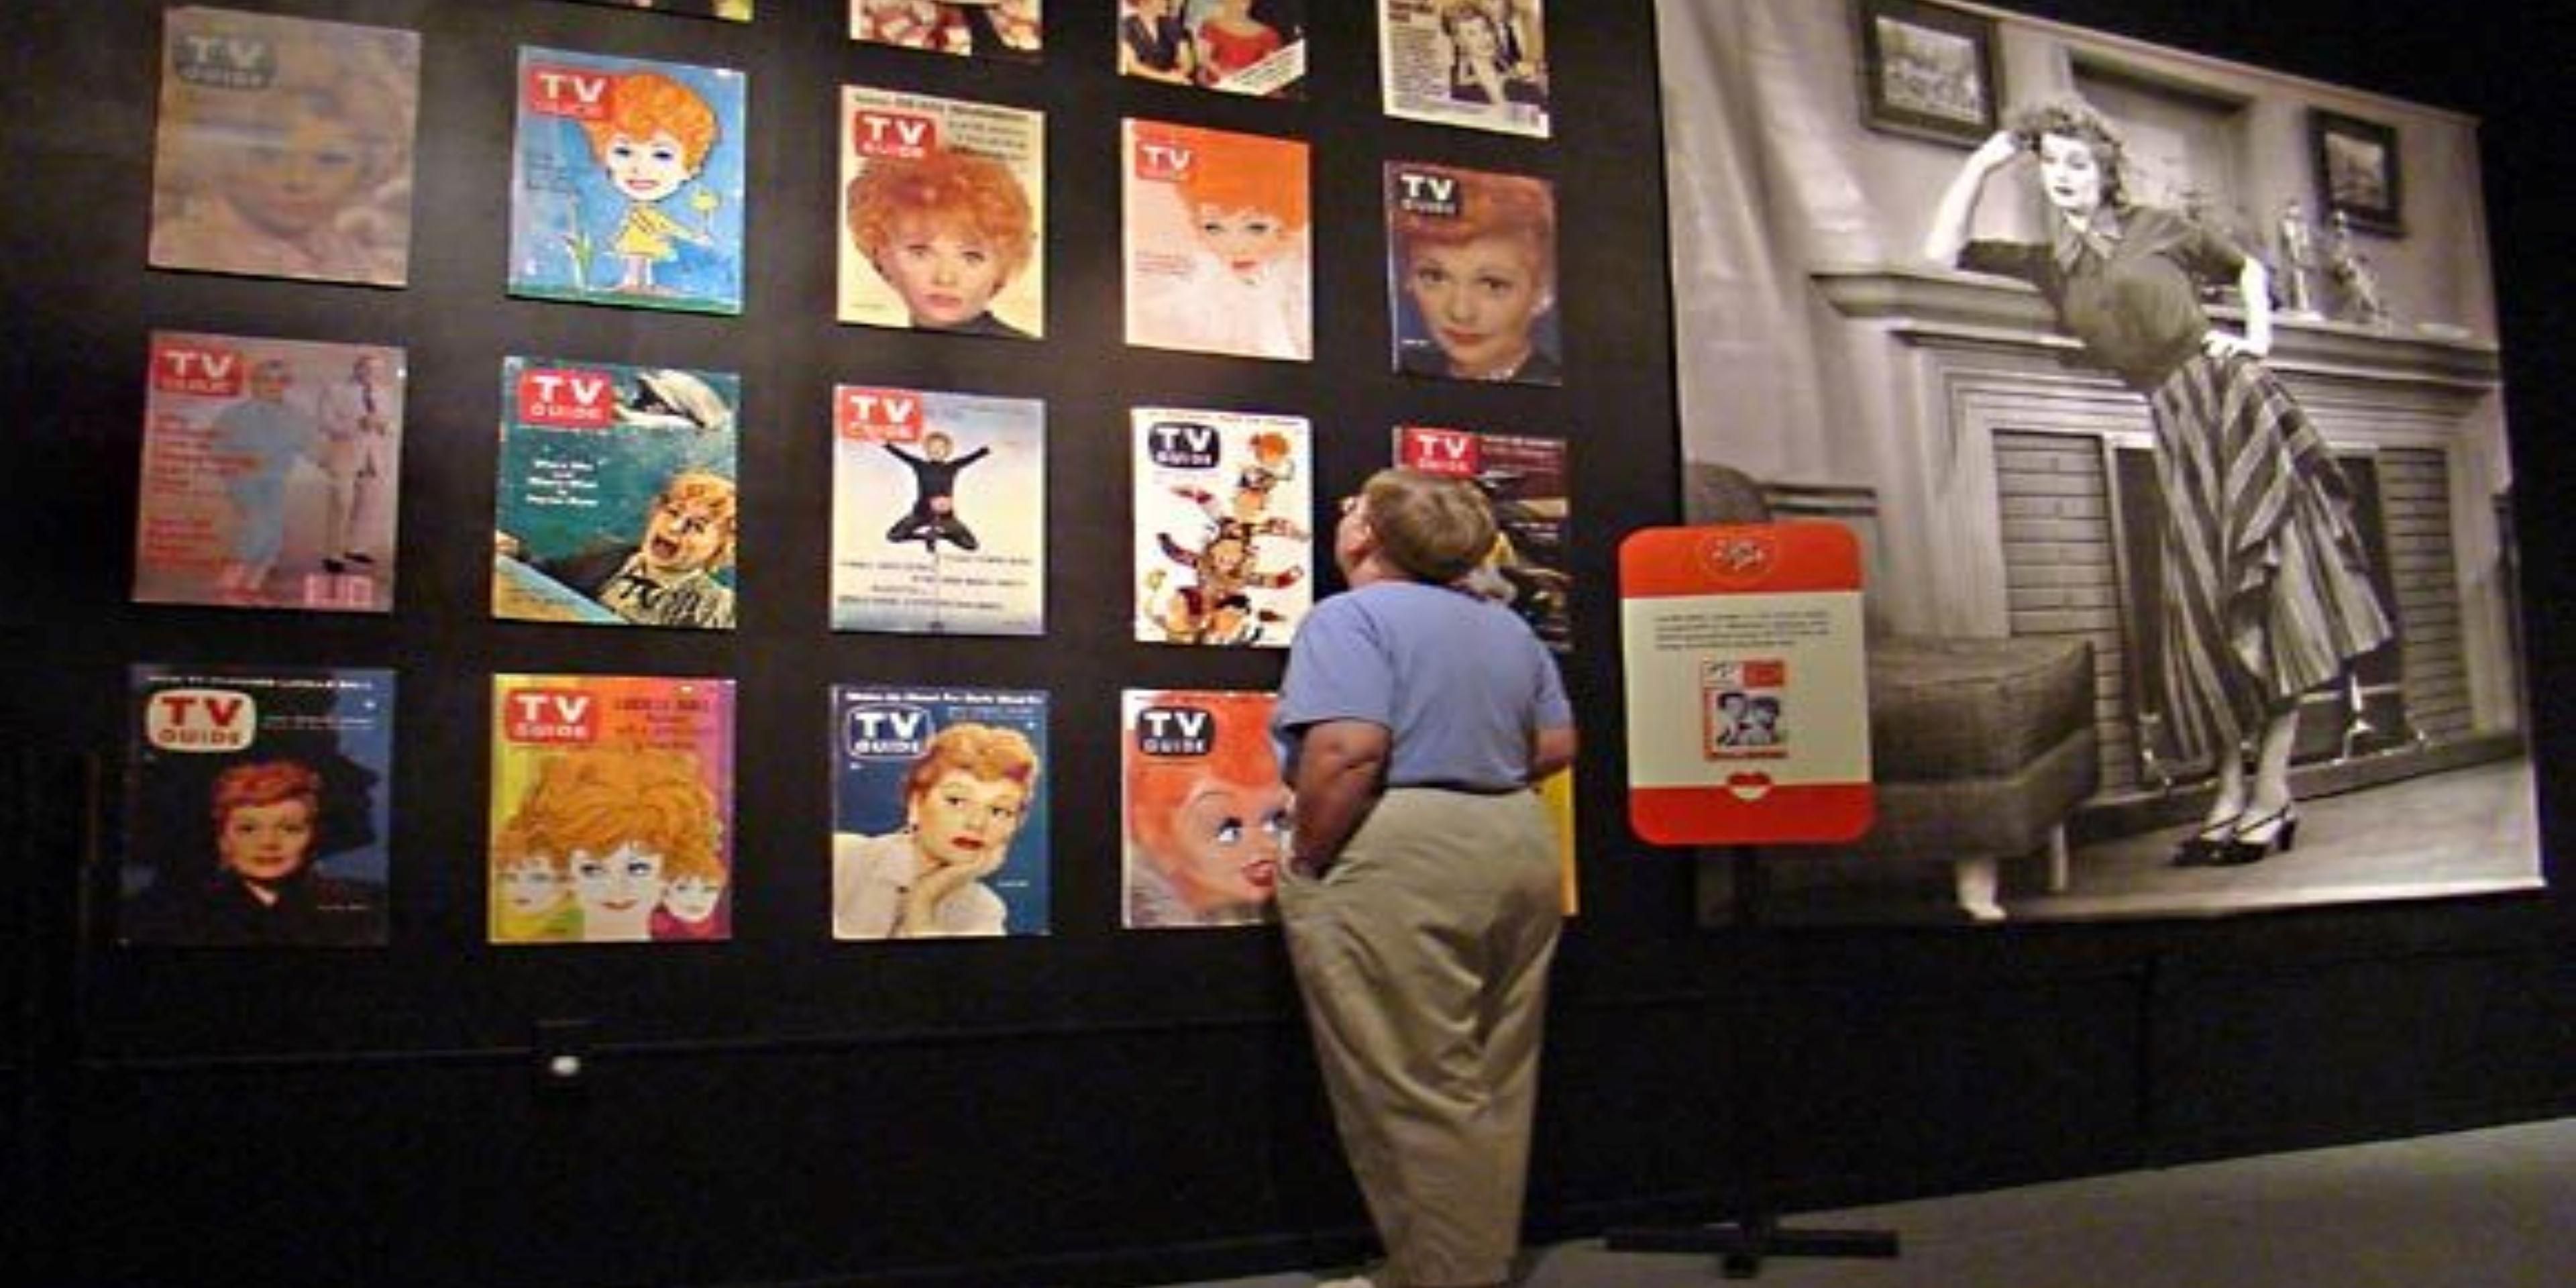 The Lucille Ball Museum in Jamestown NY is wonderful. Folks from everywhere come to the area all year long to see the memories of a great star. They leave with gifts from the gift shop and have a fabulous time.